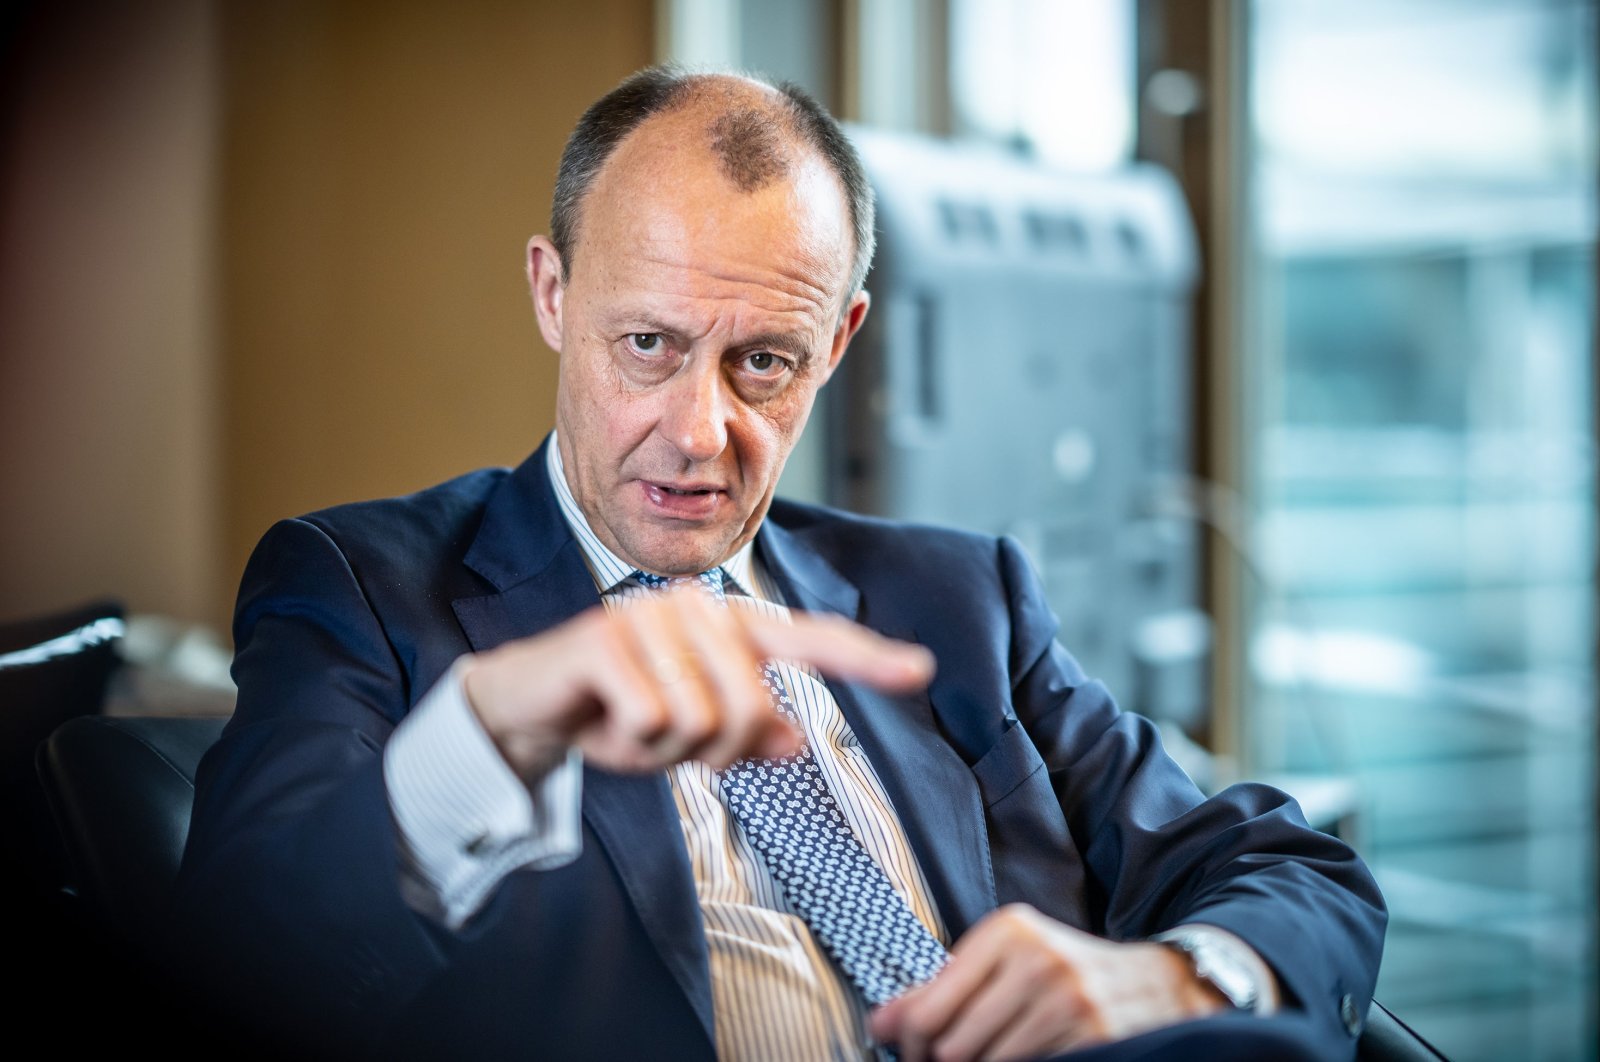 Friedrich Merz, candidate for the office of CDU federal chairperson, recorded during an interview with Deutsche Presse-Agentur in his office Jakob-Kaiser Haus in the German Bundestag, Berlin, Germany, Jan. 16, 2022. (DPA Photo)